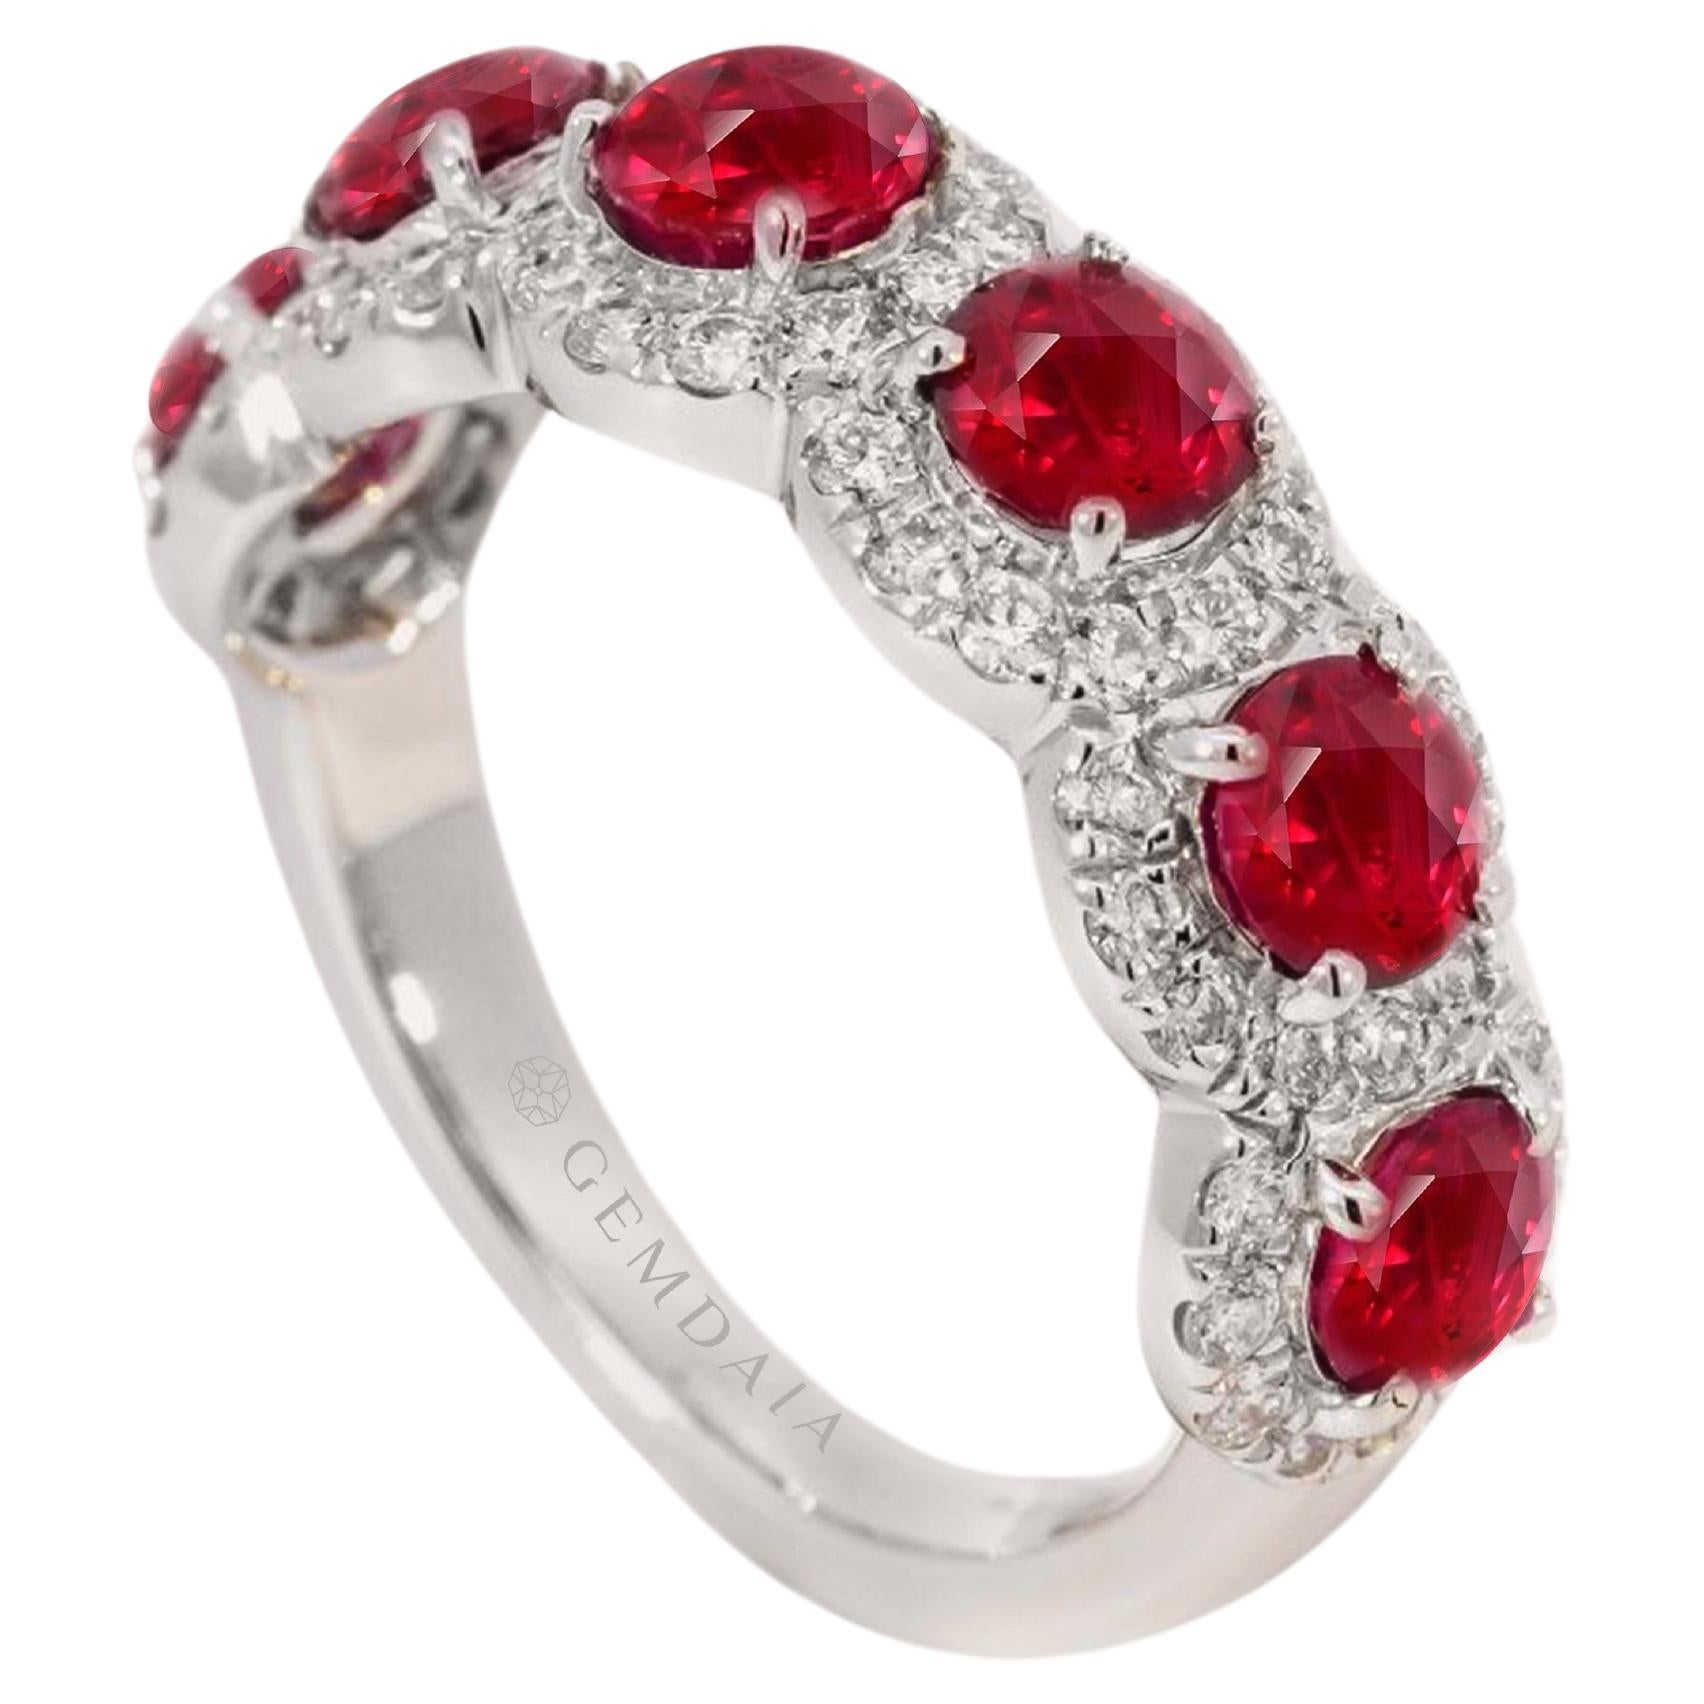 Certified Multi Stone Natural Ruby & Diamond Ring - Pigeon's Blood Red  Rubies For Sale